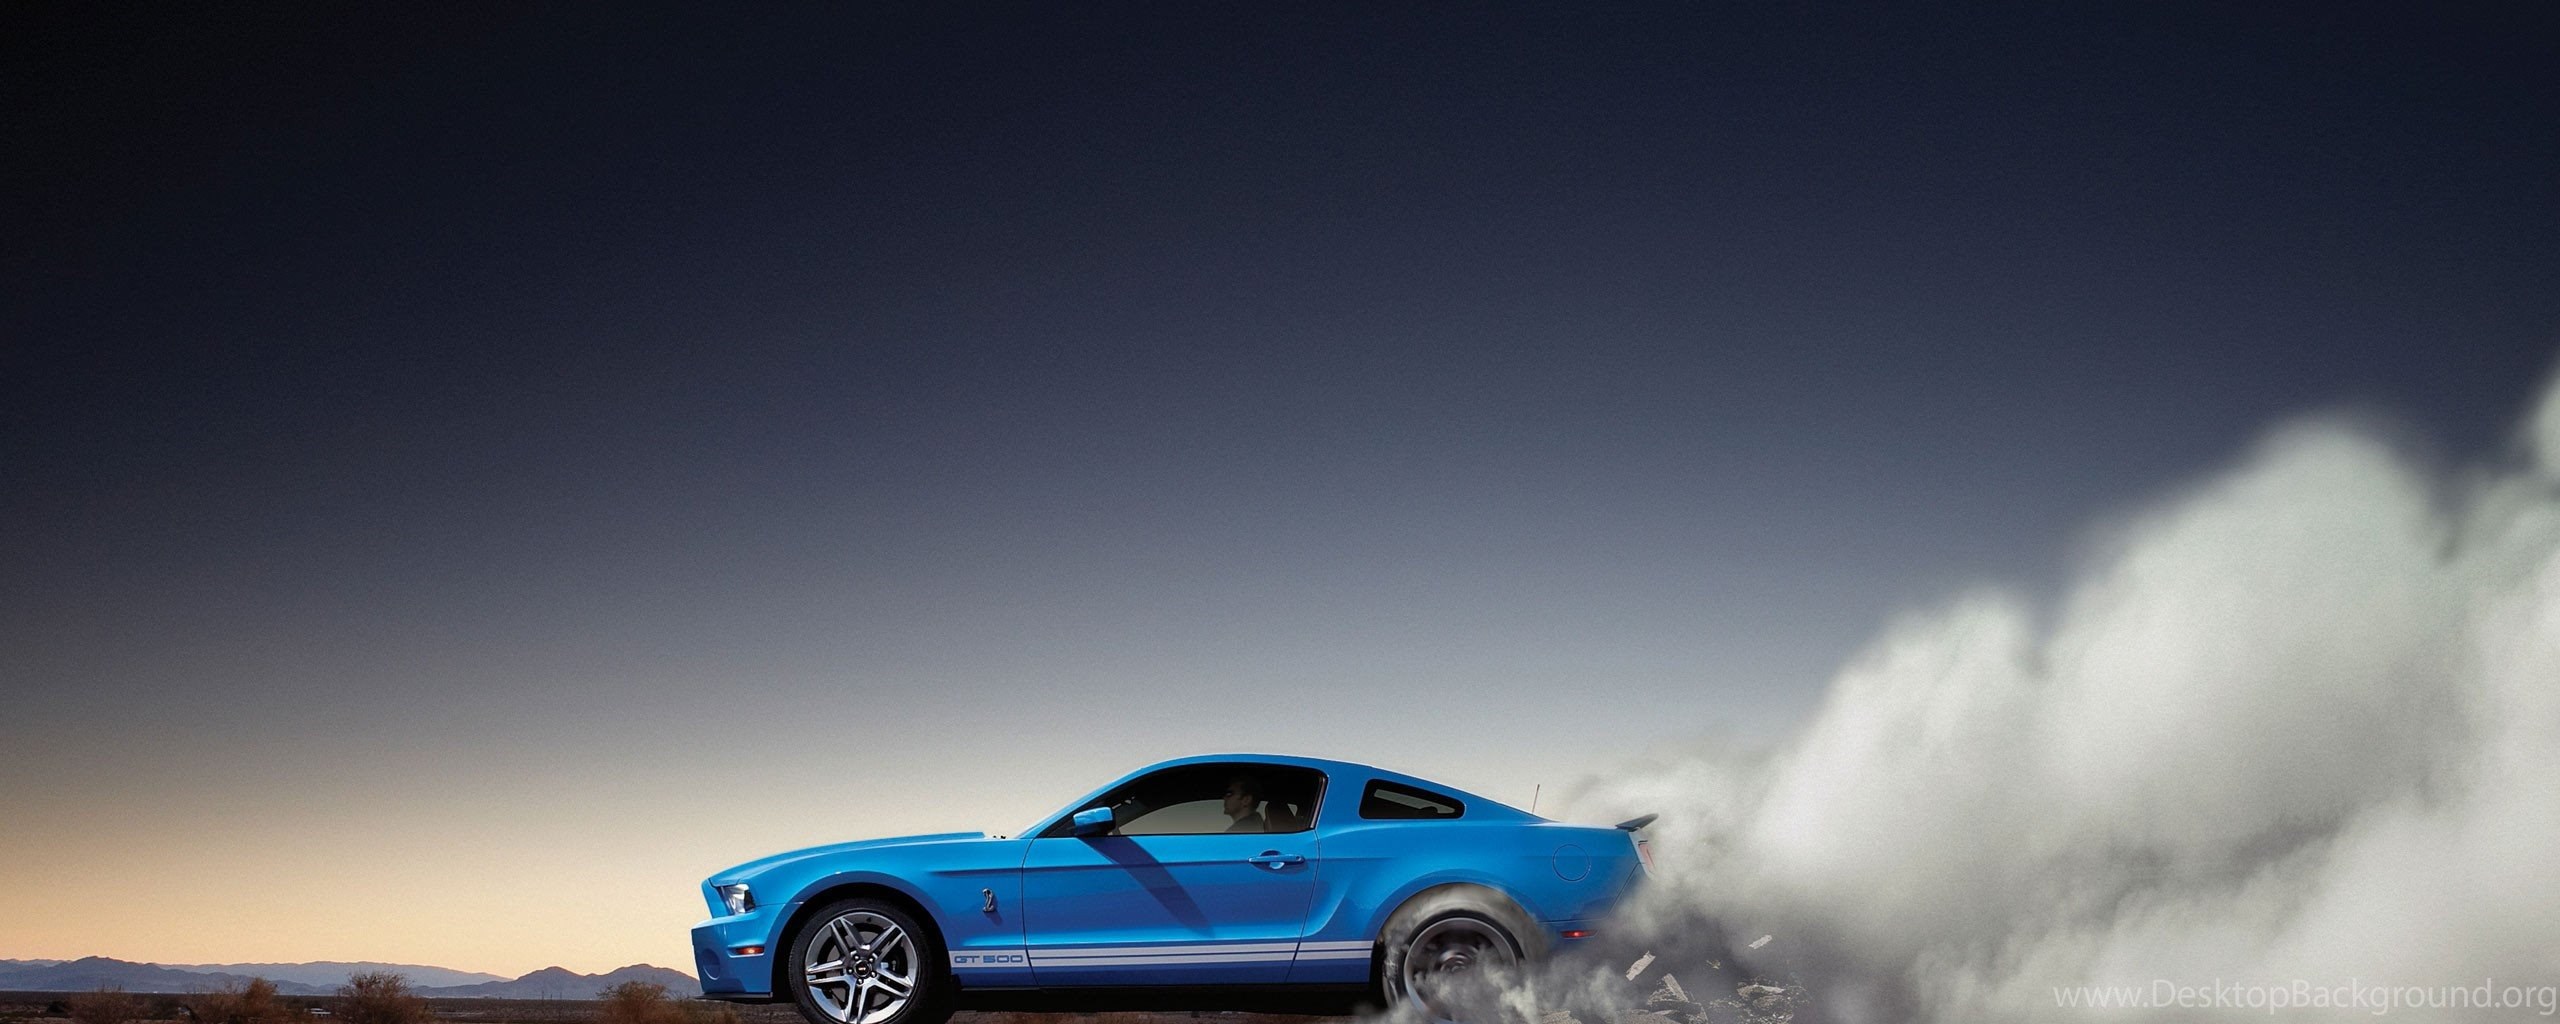 Ford Mustang Shelby Gt500 Burnout Ford Gt Mobile Wallpapers Desktop Background